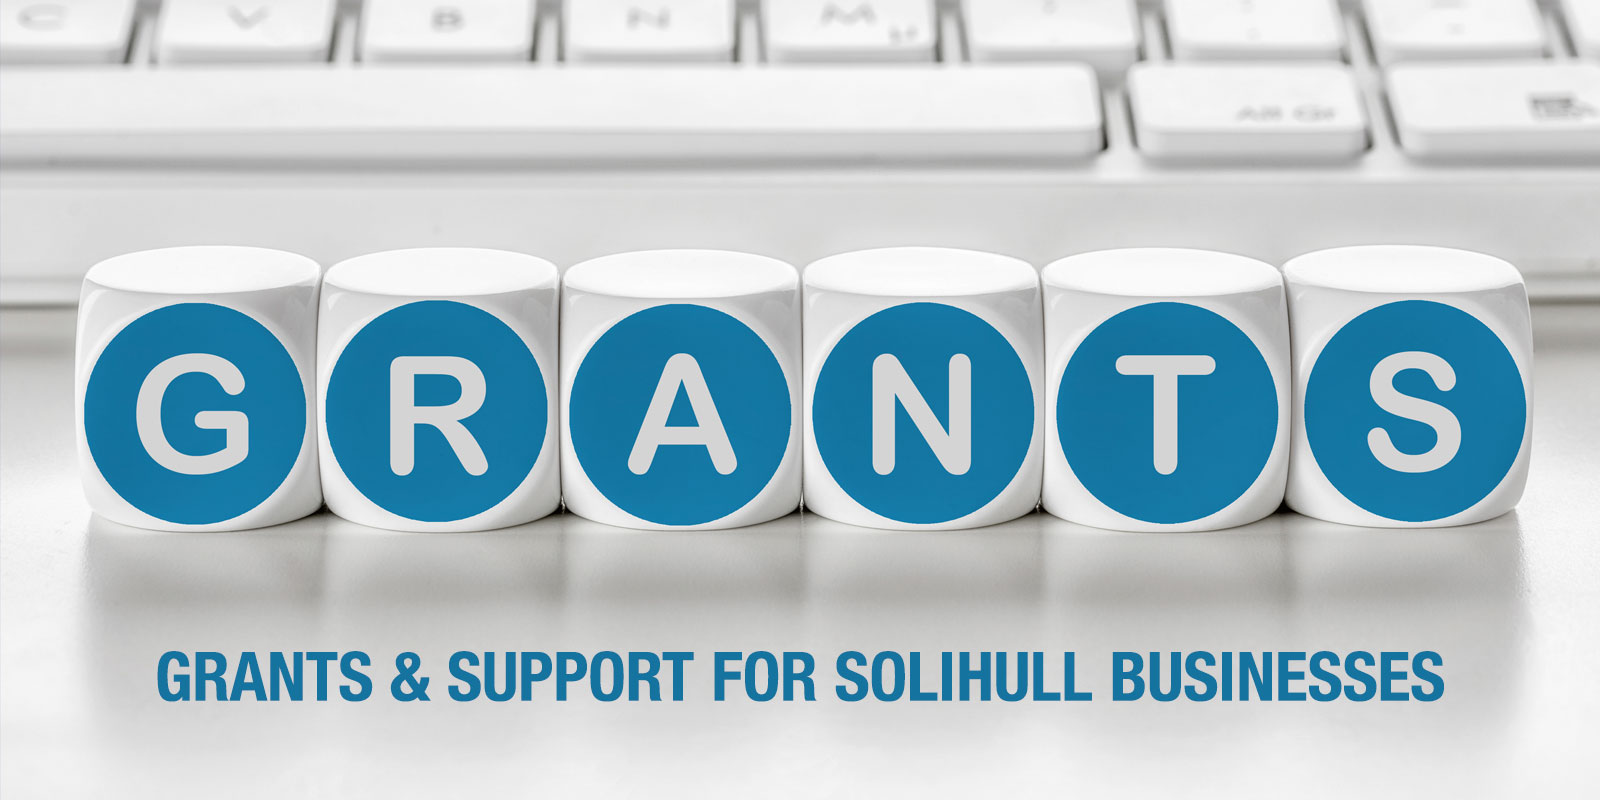 Grants & Support for Solihull Businesses